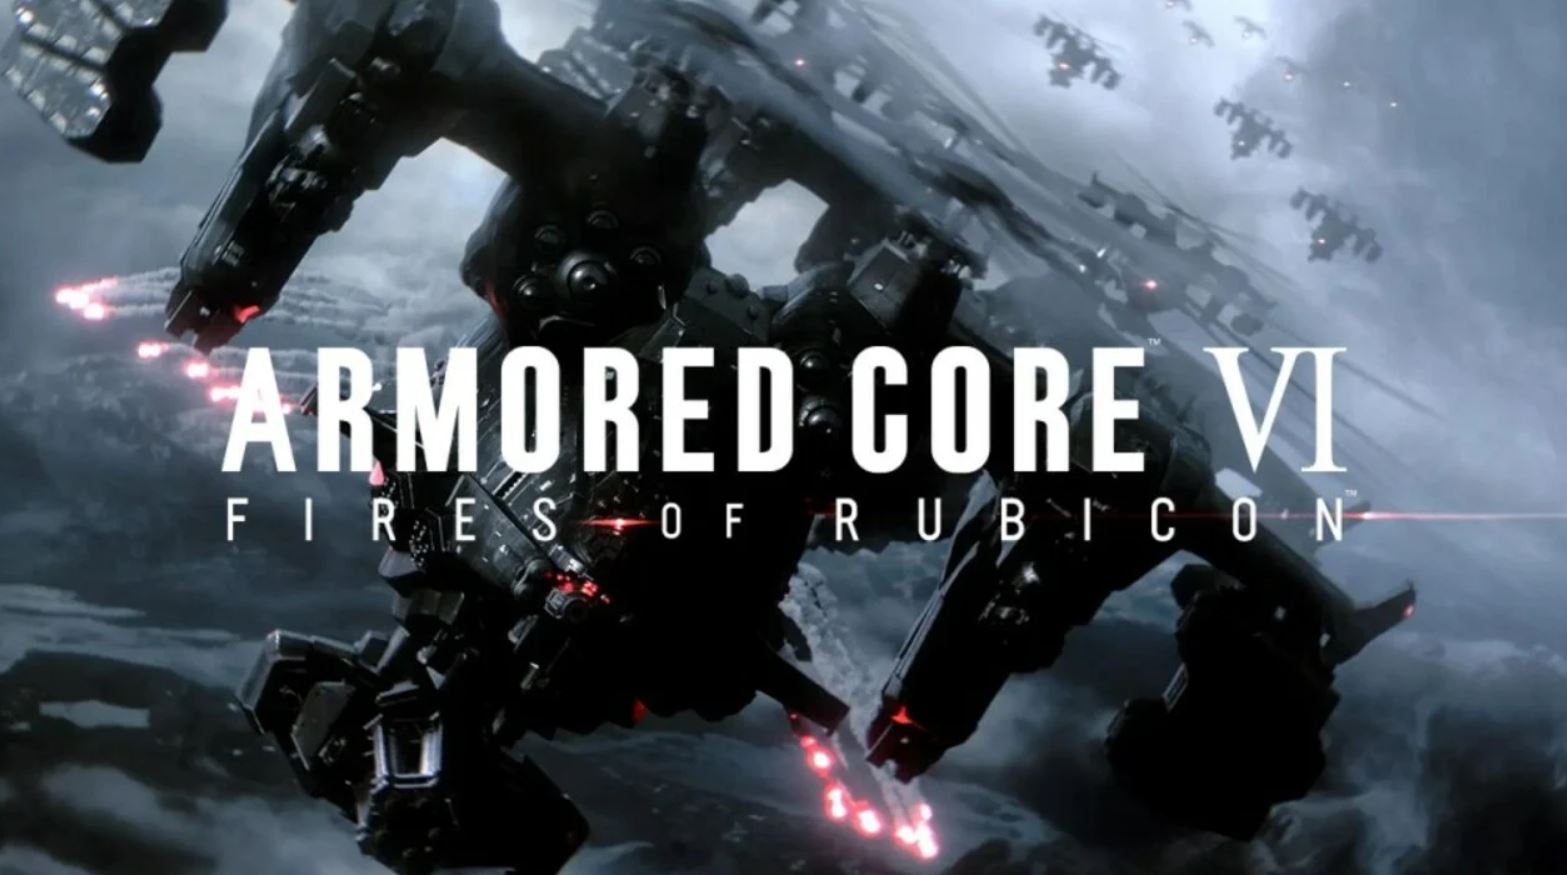 BANDAI NAMCO EUROPE AND FROMSOFTWARE ANNOUNCE NEW ACTION GAME ARMORED